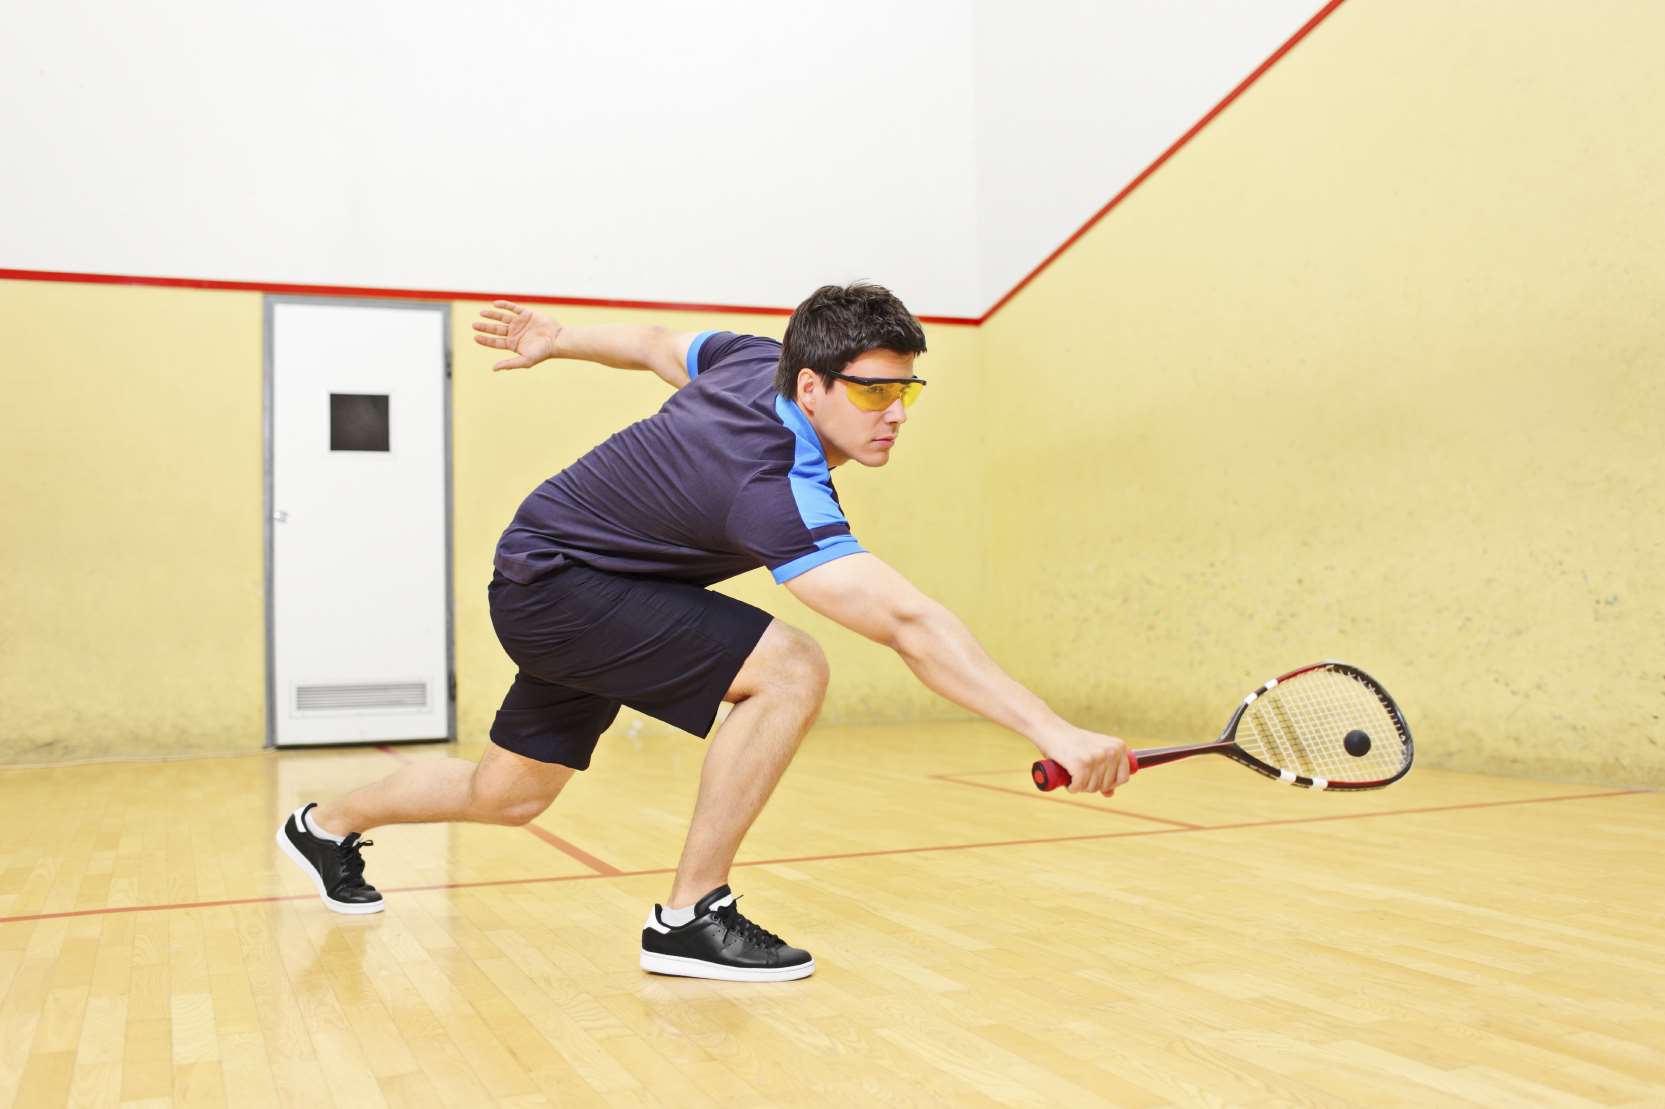 You need to be fit to try your hand at squash... and we don't mean the cordial